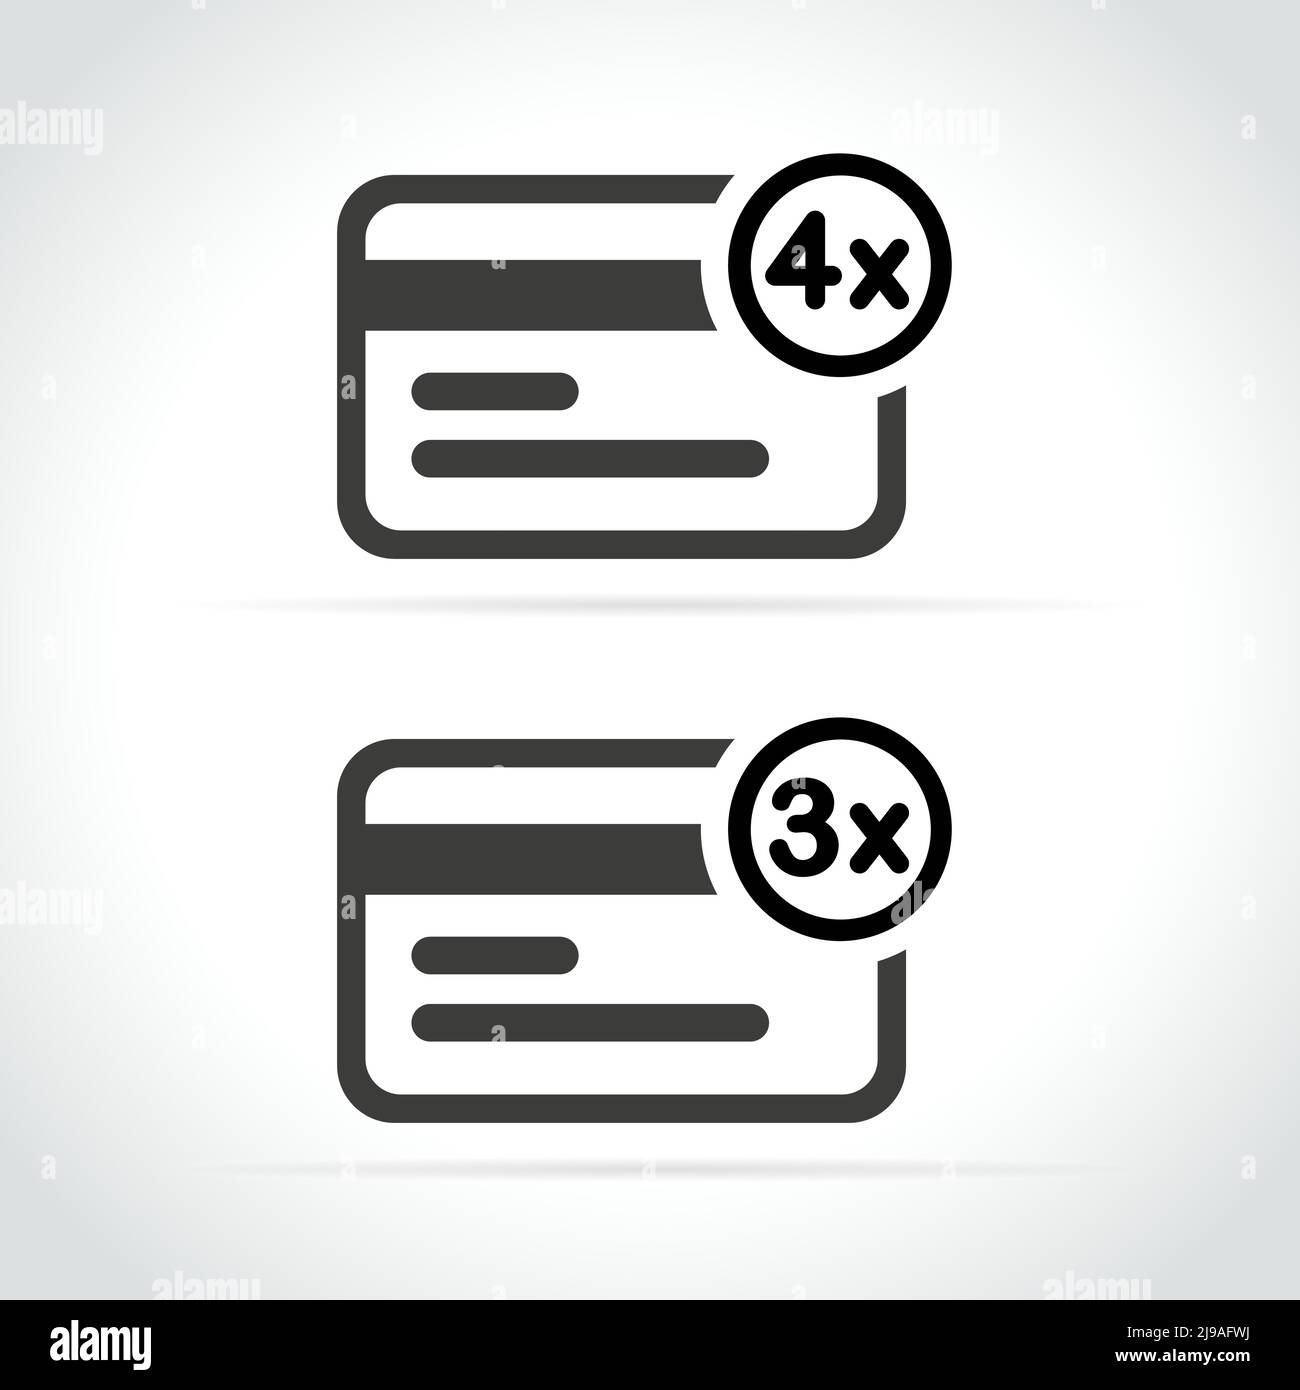 ease of payment icon black and white Stock Vector